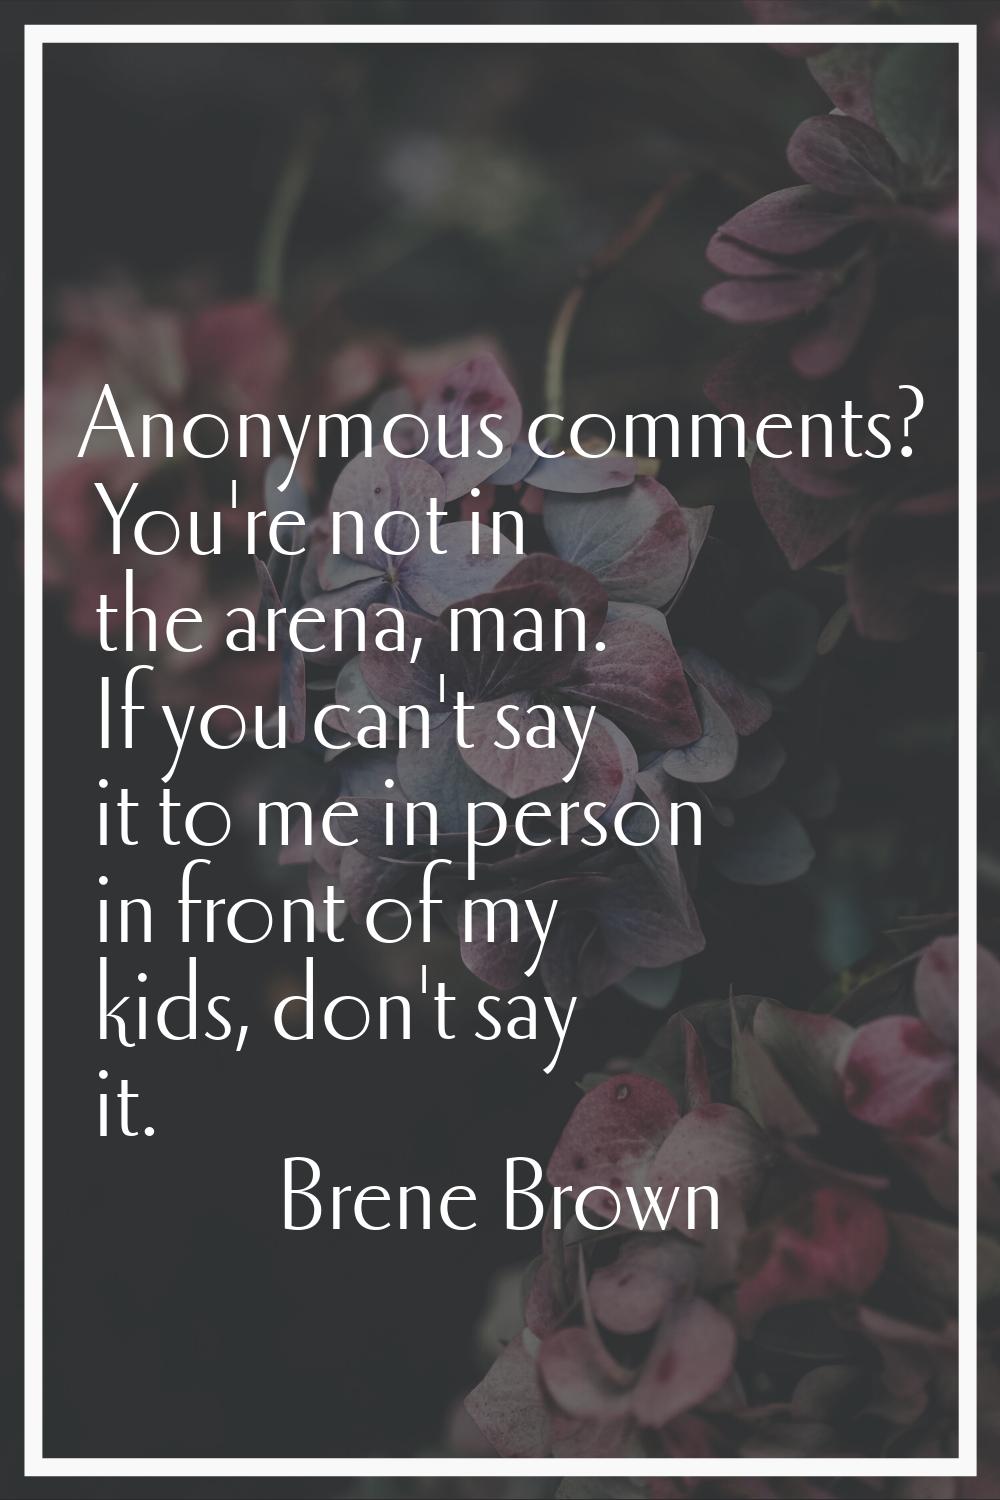 Anonymous comments? You're not in the arena, man. If you can't say it to me in person in front of m